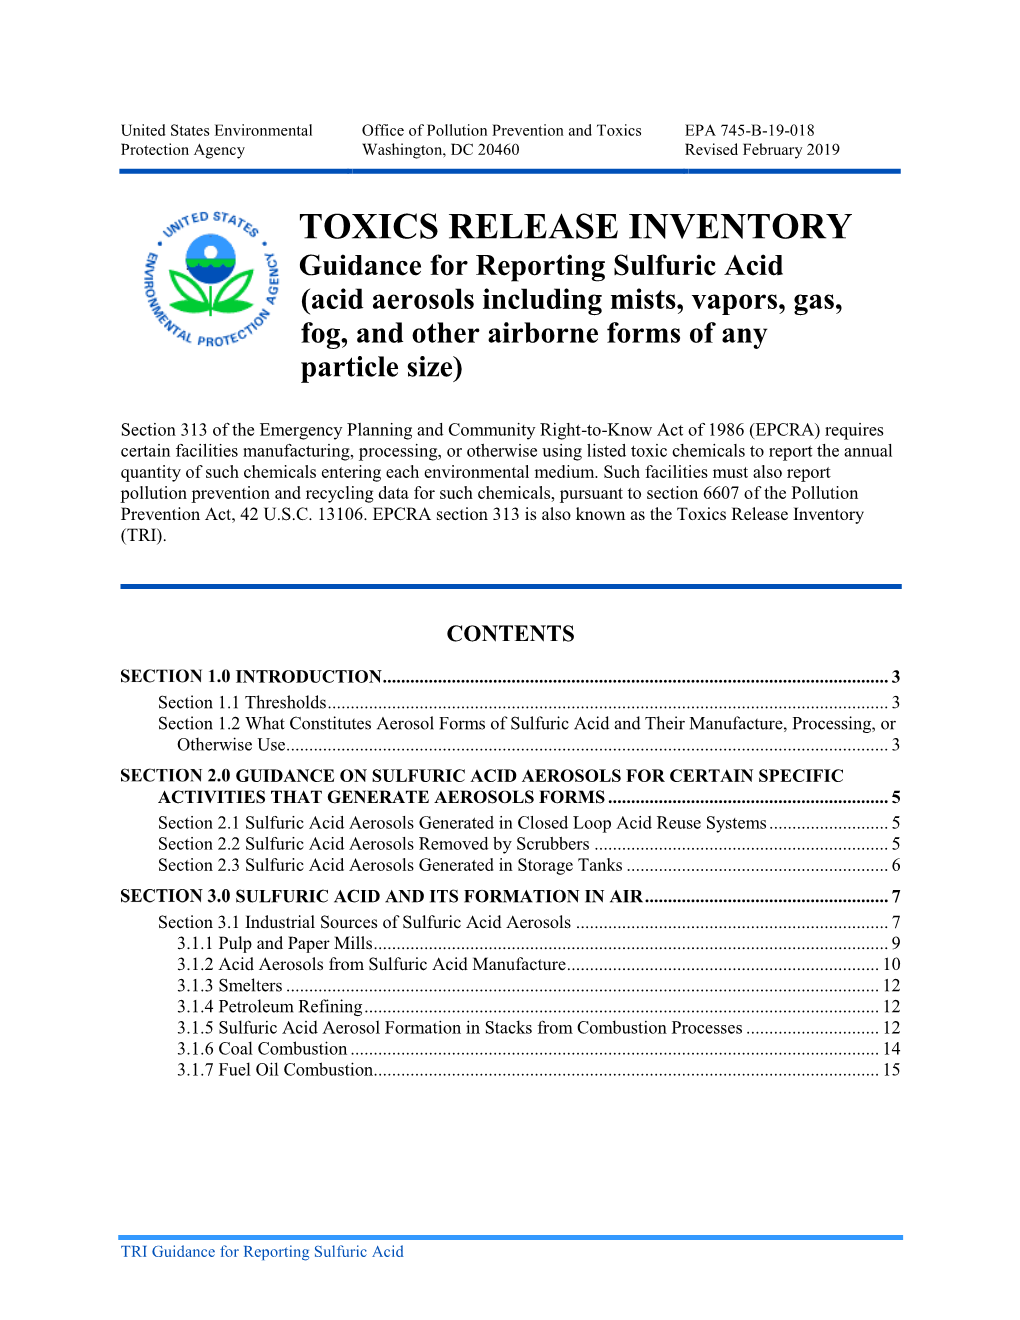 TOXICS RELEASE INVENTORY Guidance for Reporting Sulfuric Acid (Acid Aerosols Including Mists, Vapors, Gas, Fog, and Other Airborne Forms of Any Particle Size)